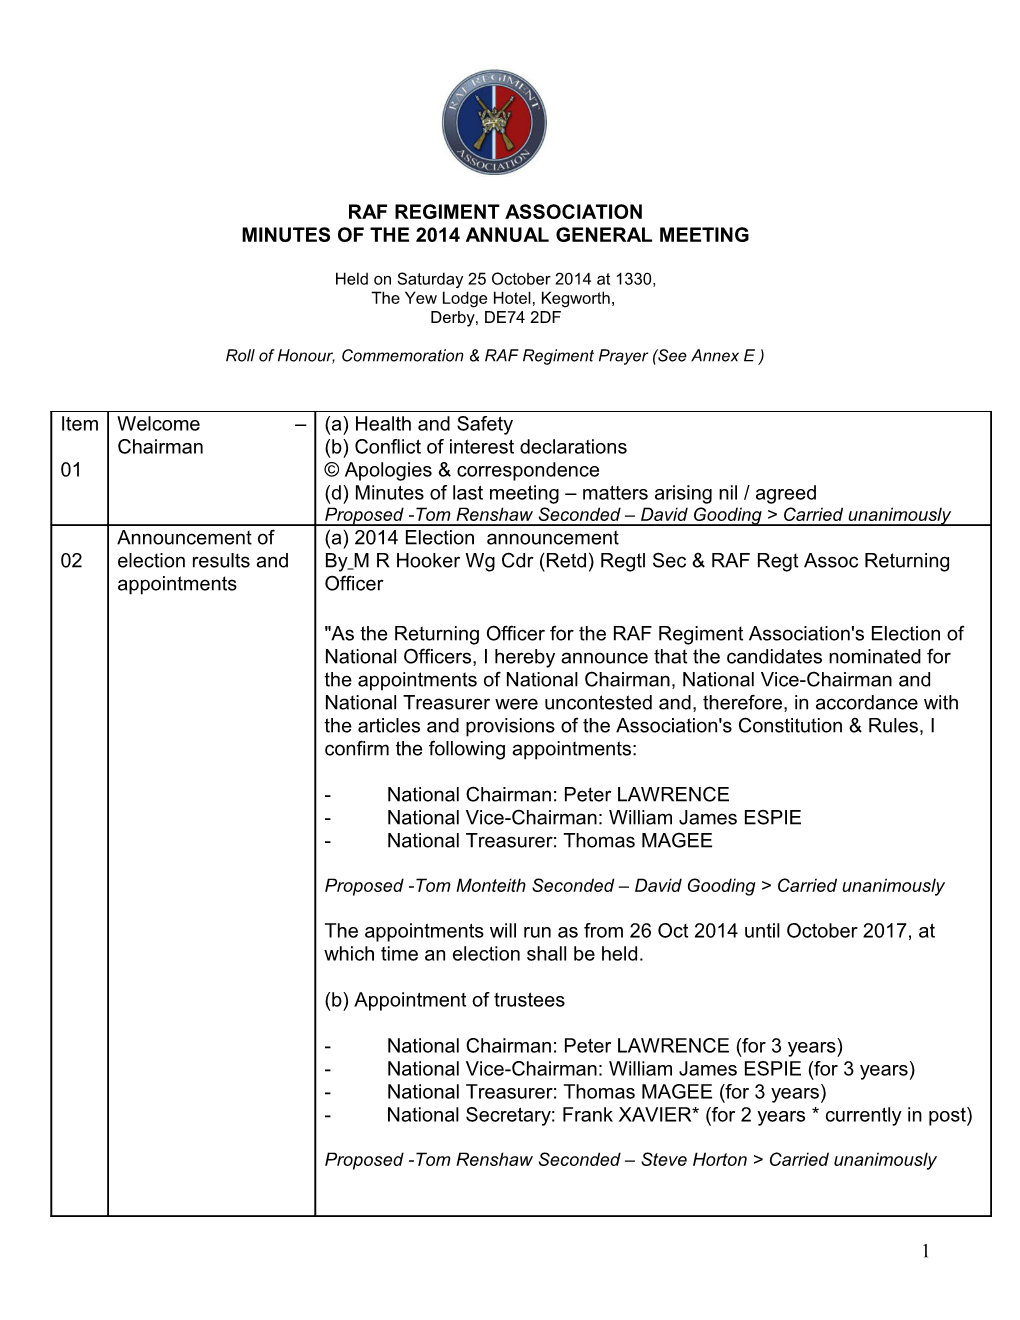 Minutes of the 2014 Annual General Meeting